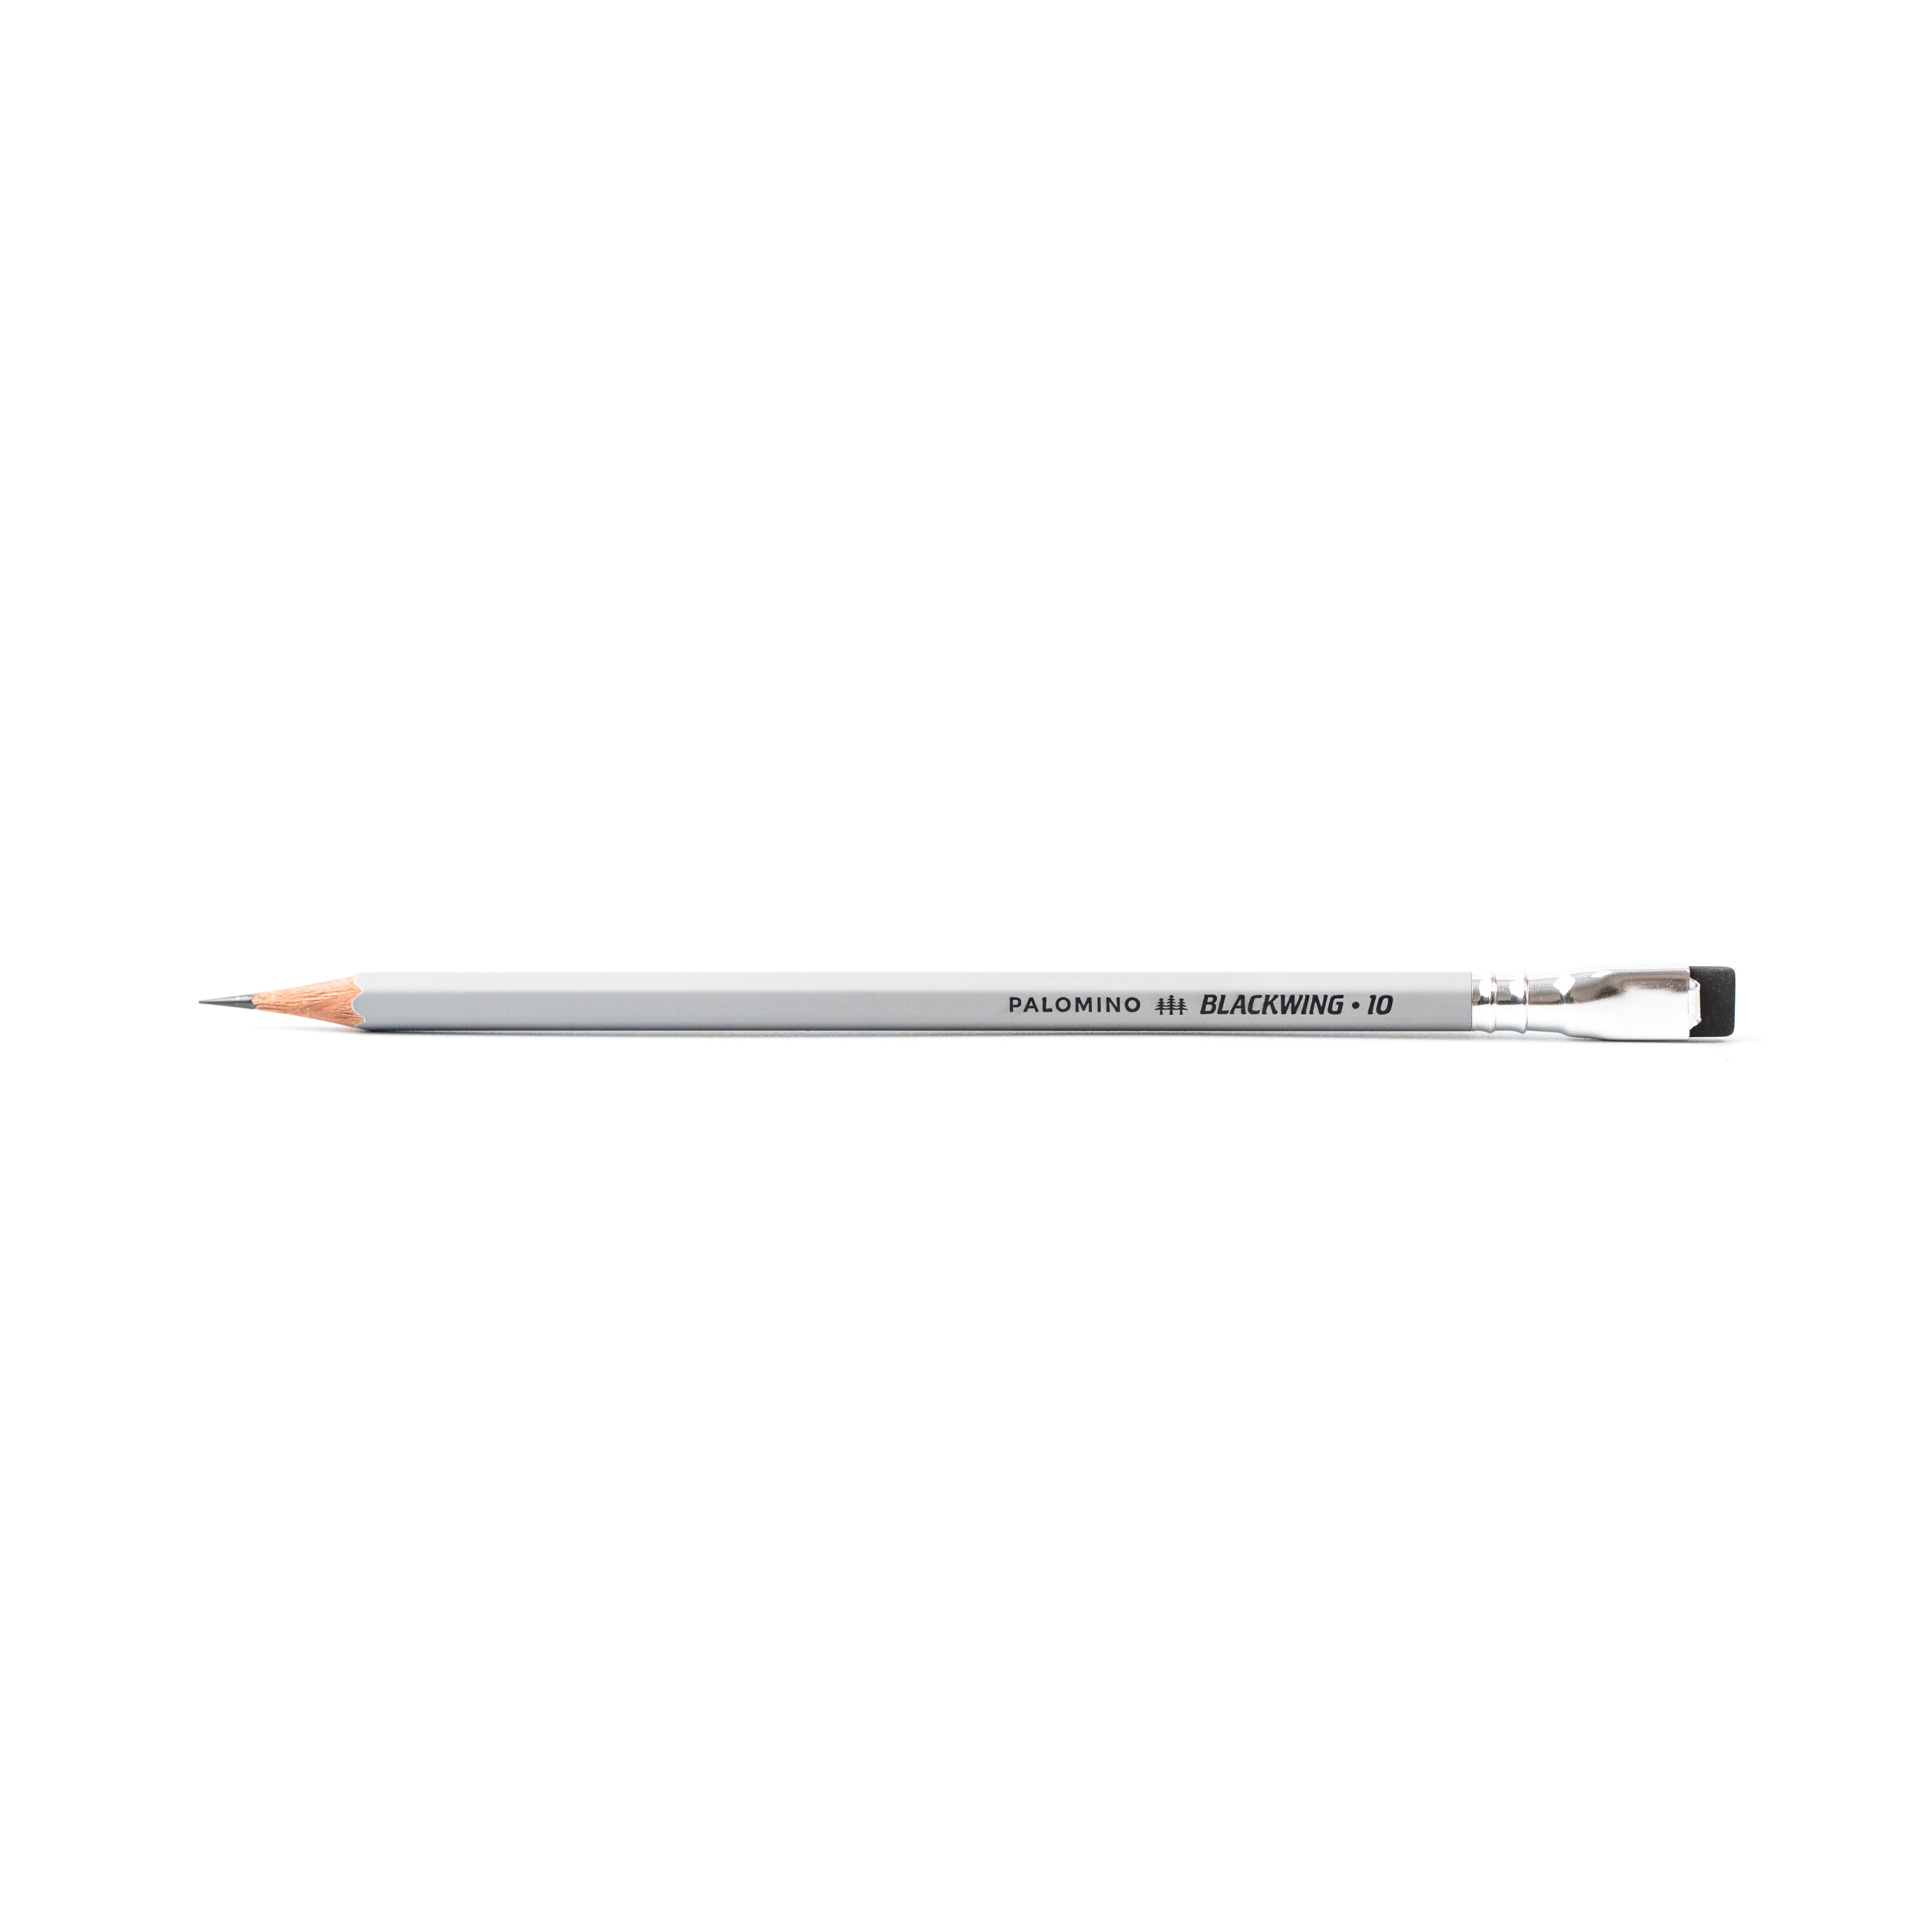 A Blackwing Volume 10 (Set of 12) pencil on a white background.